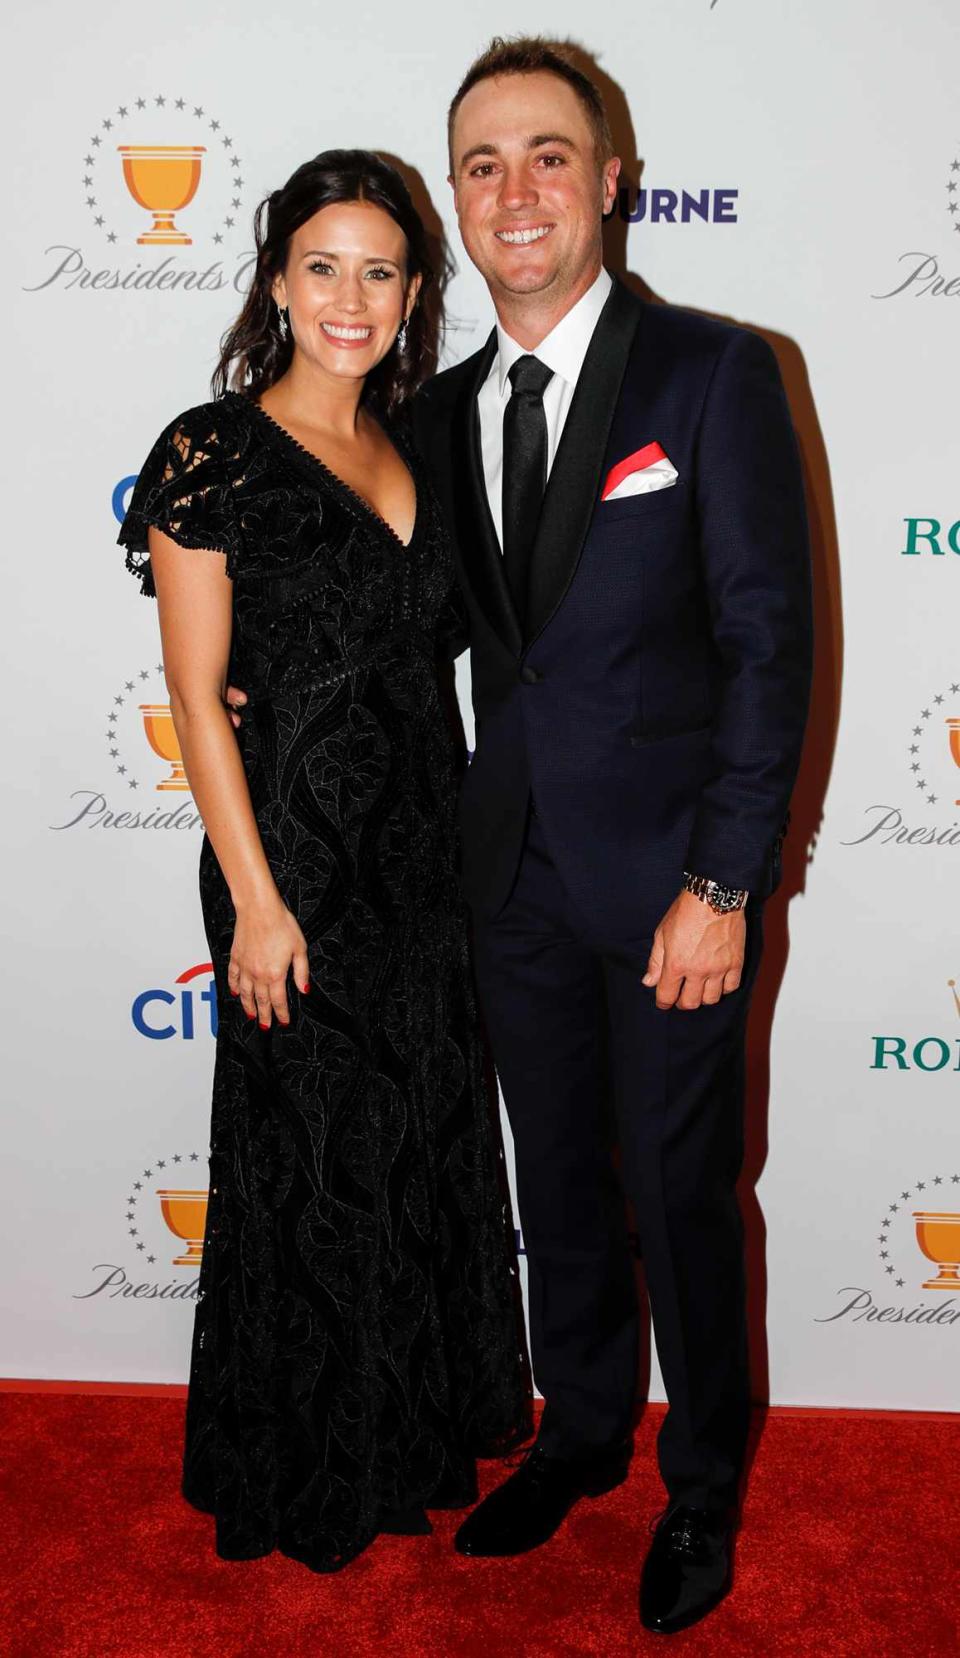 Justin Thomas and partner Jillian Wisniewski on the red carpet prior to Presidents Cup at The Royal Melbourne Golf Club on December 10, 2019, in Melbourne, Australia